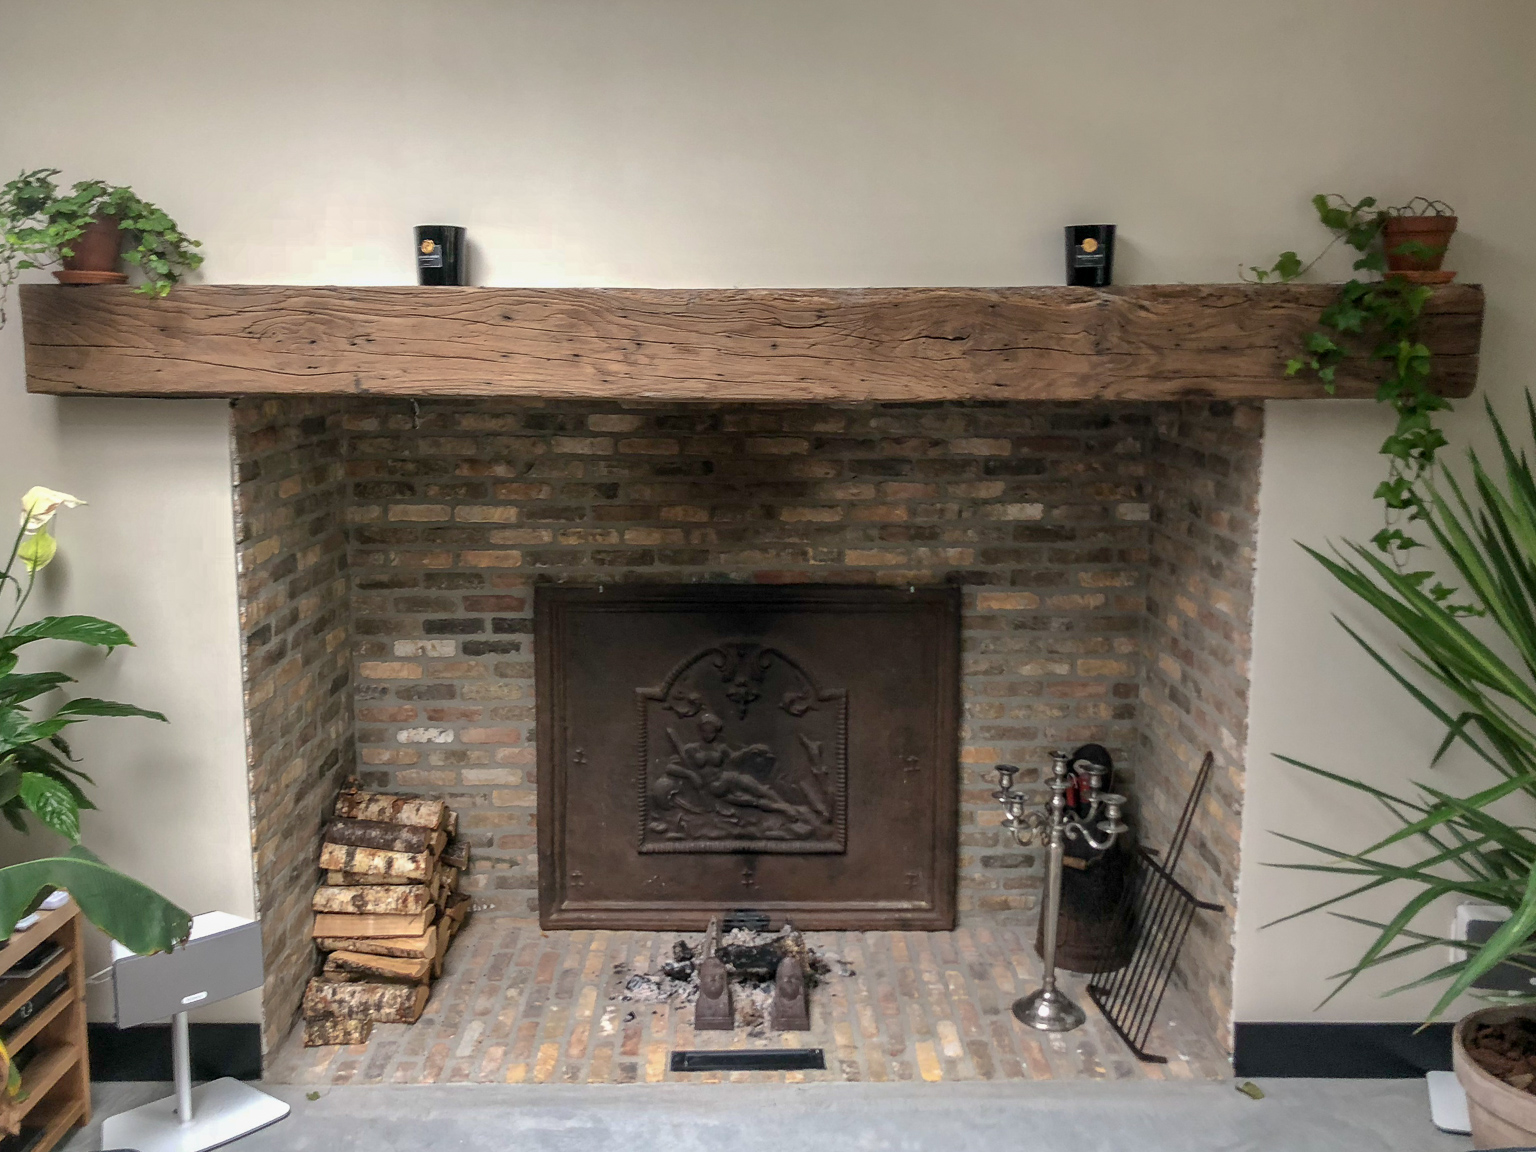 Sturdy fireplace made lighter with fireplace accessories